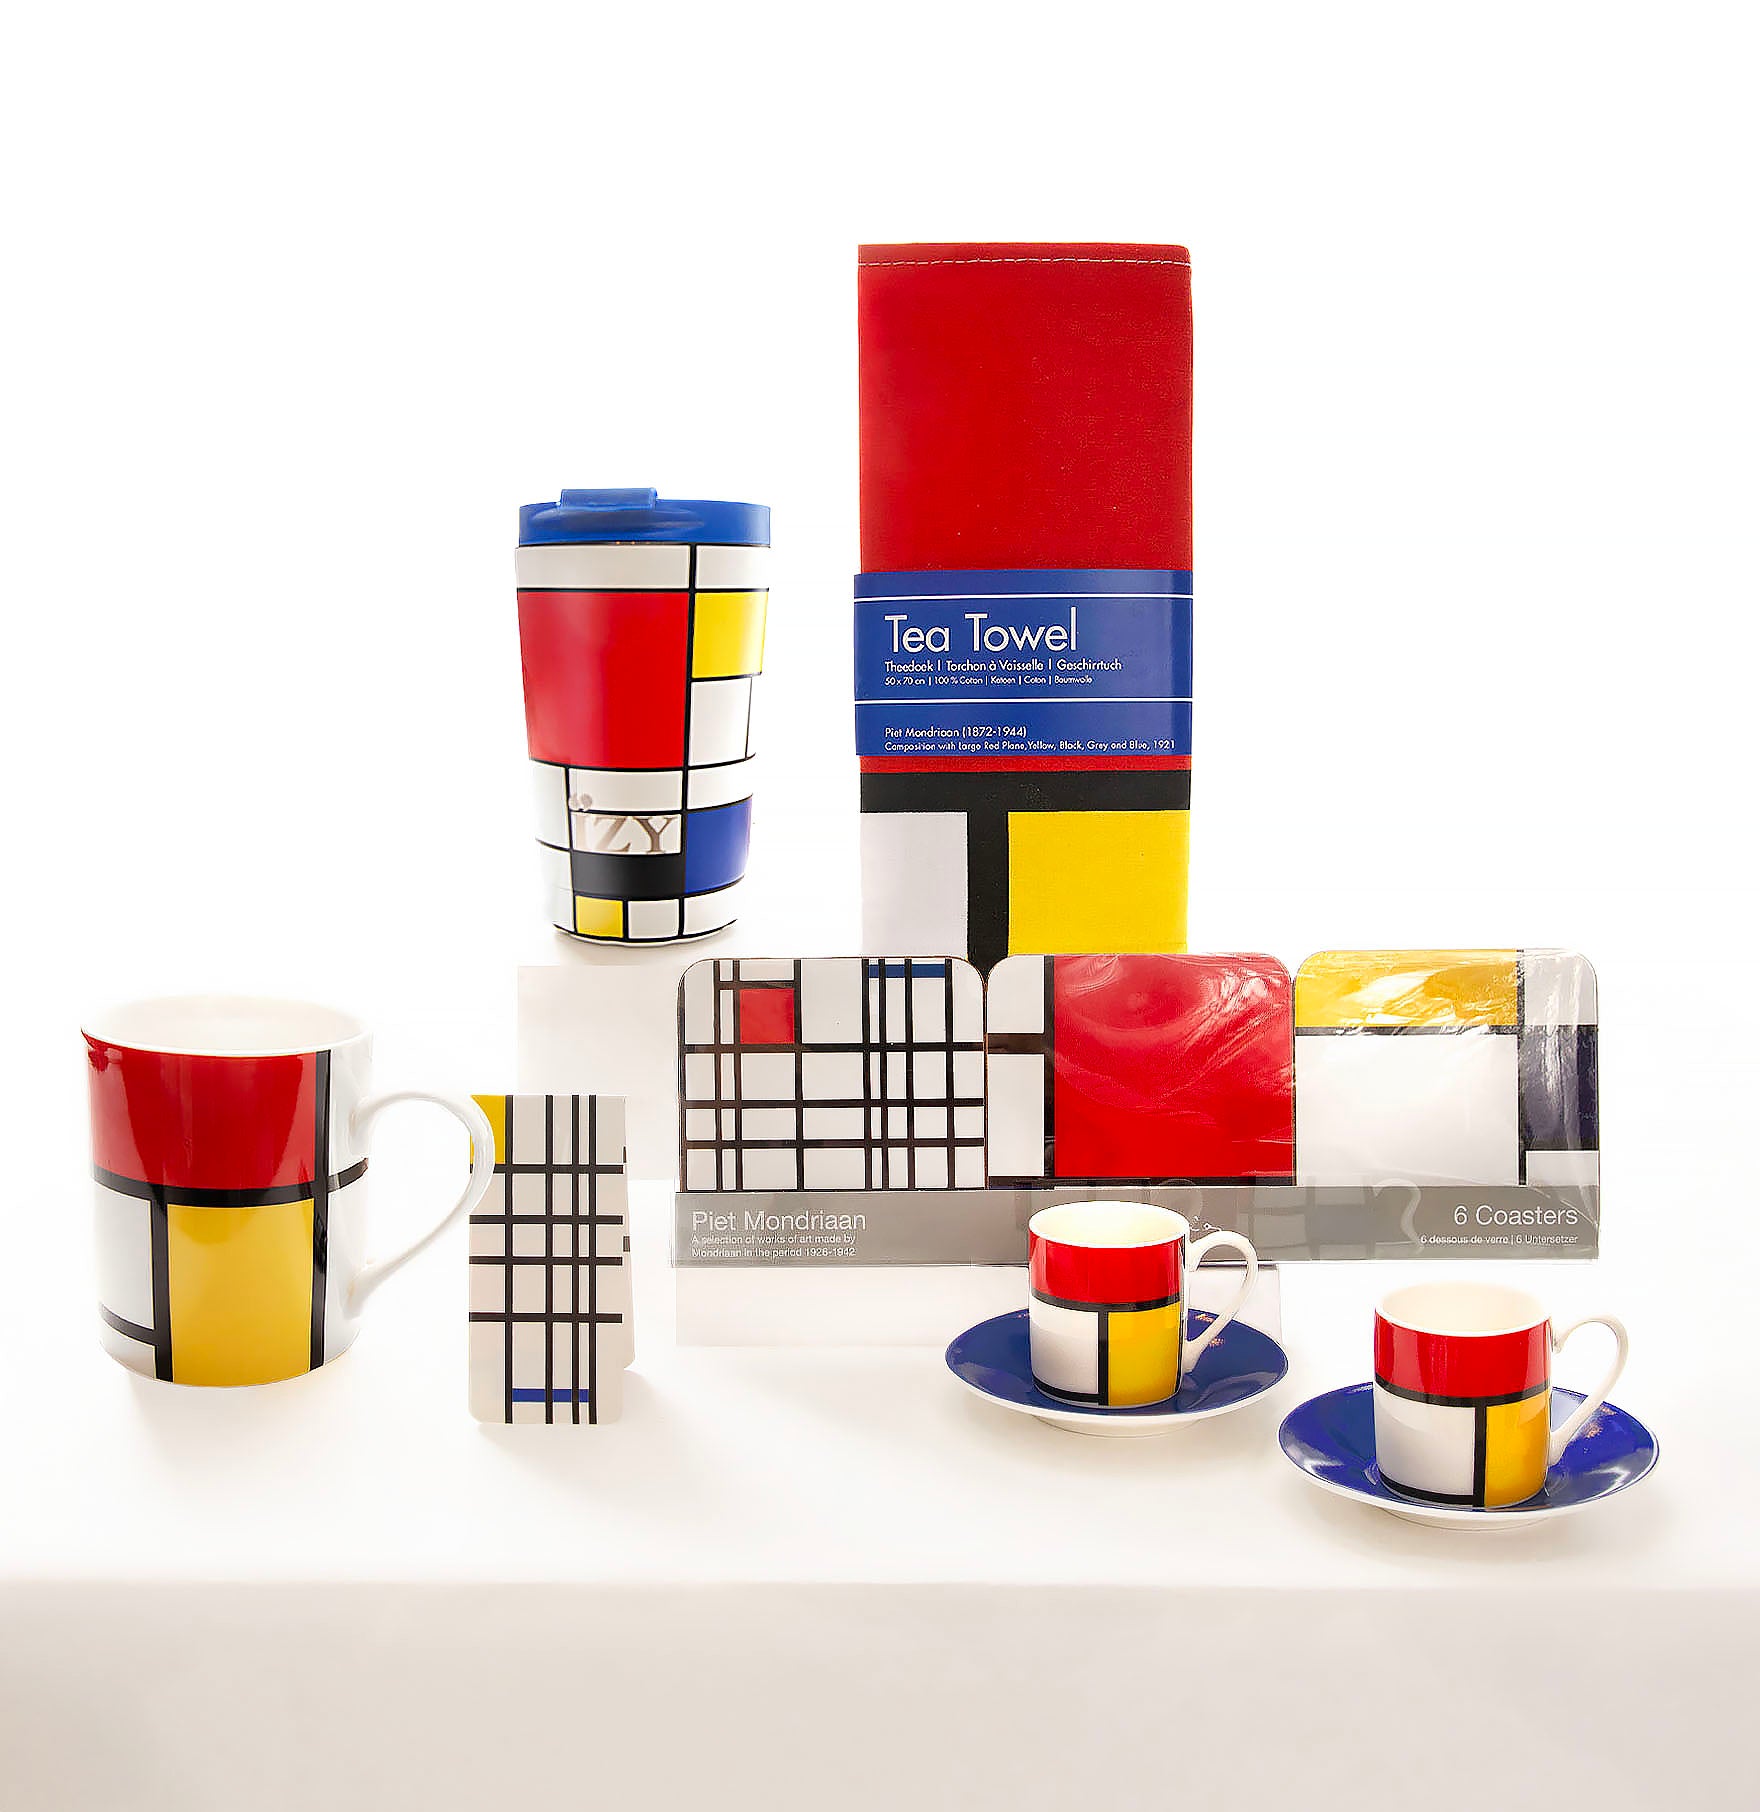 Shop Now! From Holland Mondrian Museum Luxury Souvenirs Gift Set!